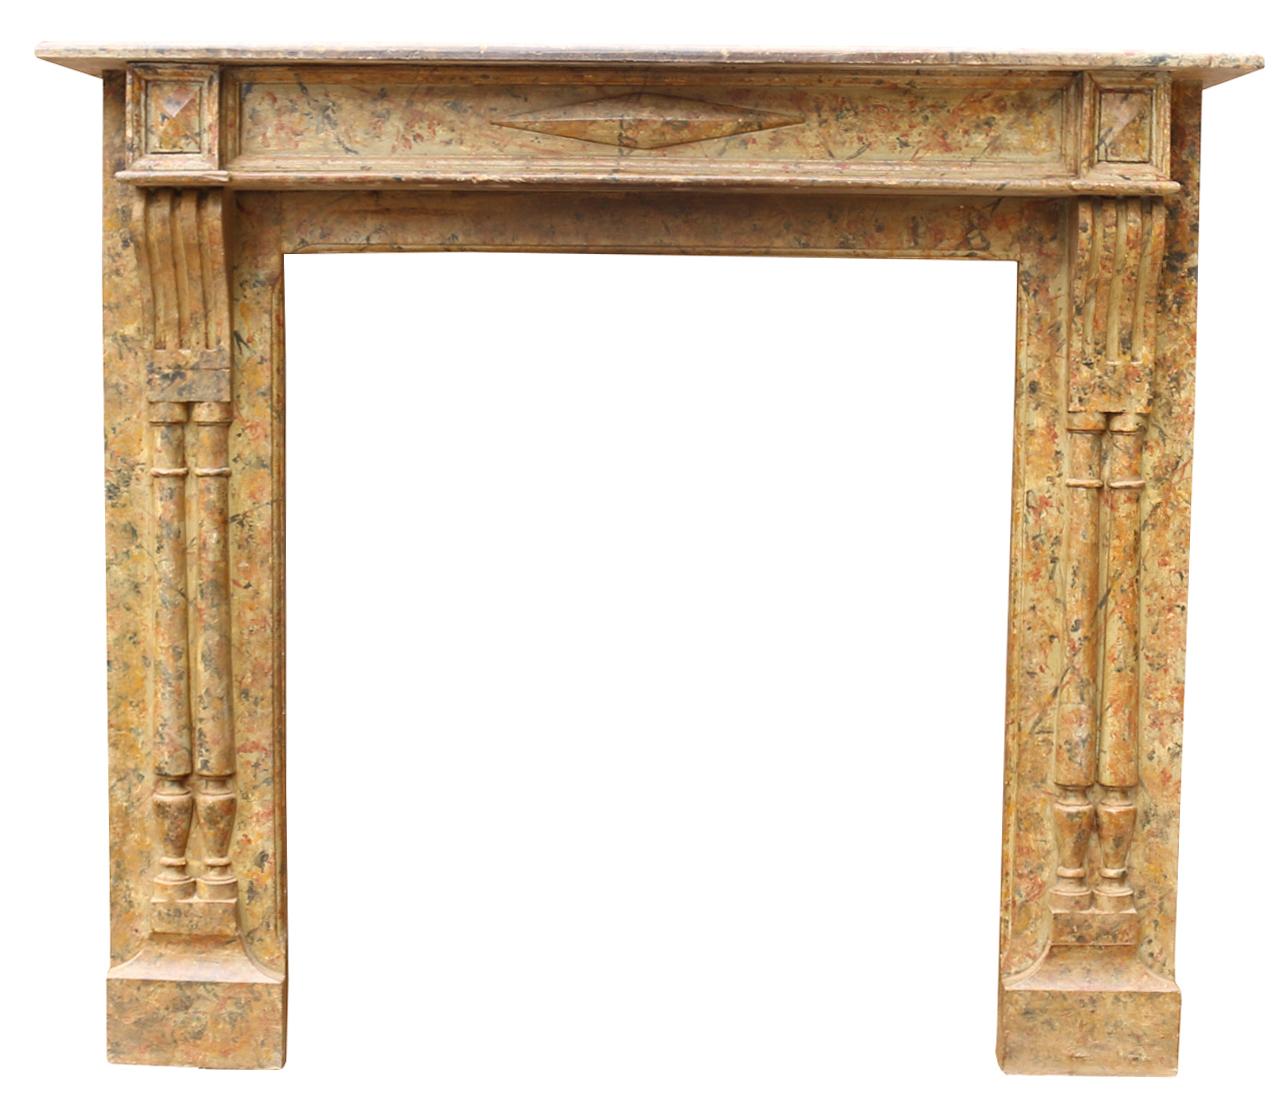 This fire surround has a hand painted scumble glaze finish.

Additional dimensions

Opening height 91 cm

Opening width 80 cm

Width between outside of legs 119.5 cm.